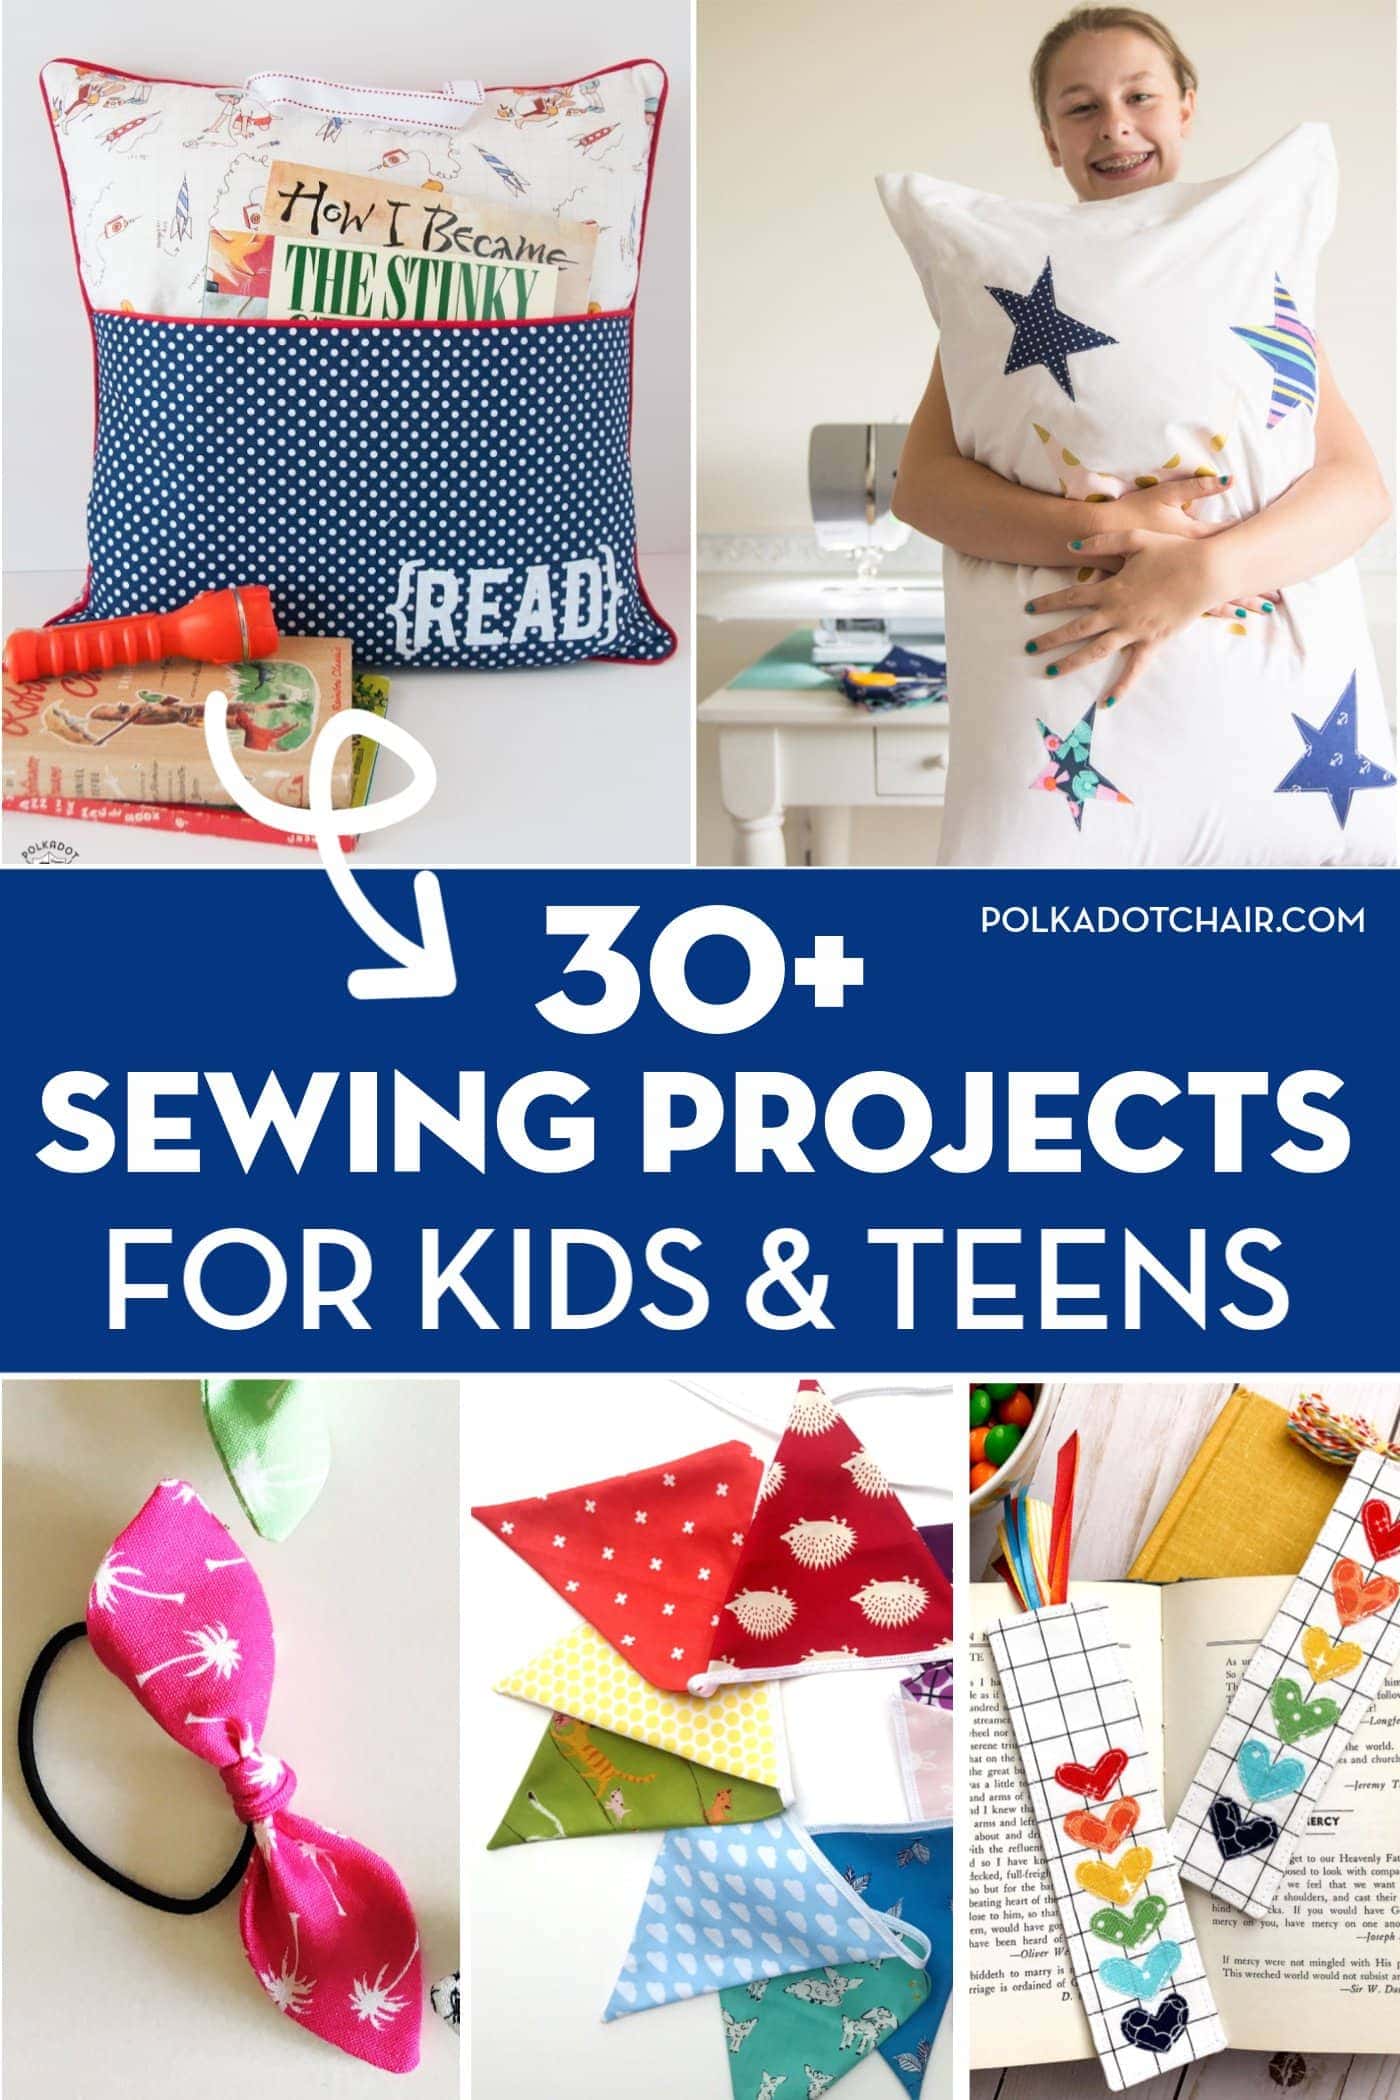 8 Professional Sewing Gift Ideas for Mom, Friends & Sisters